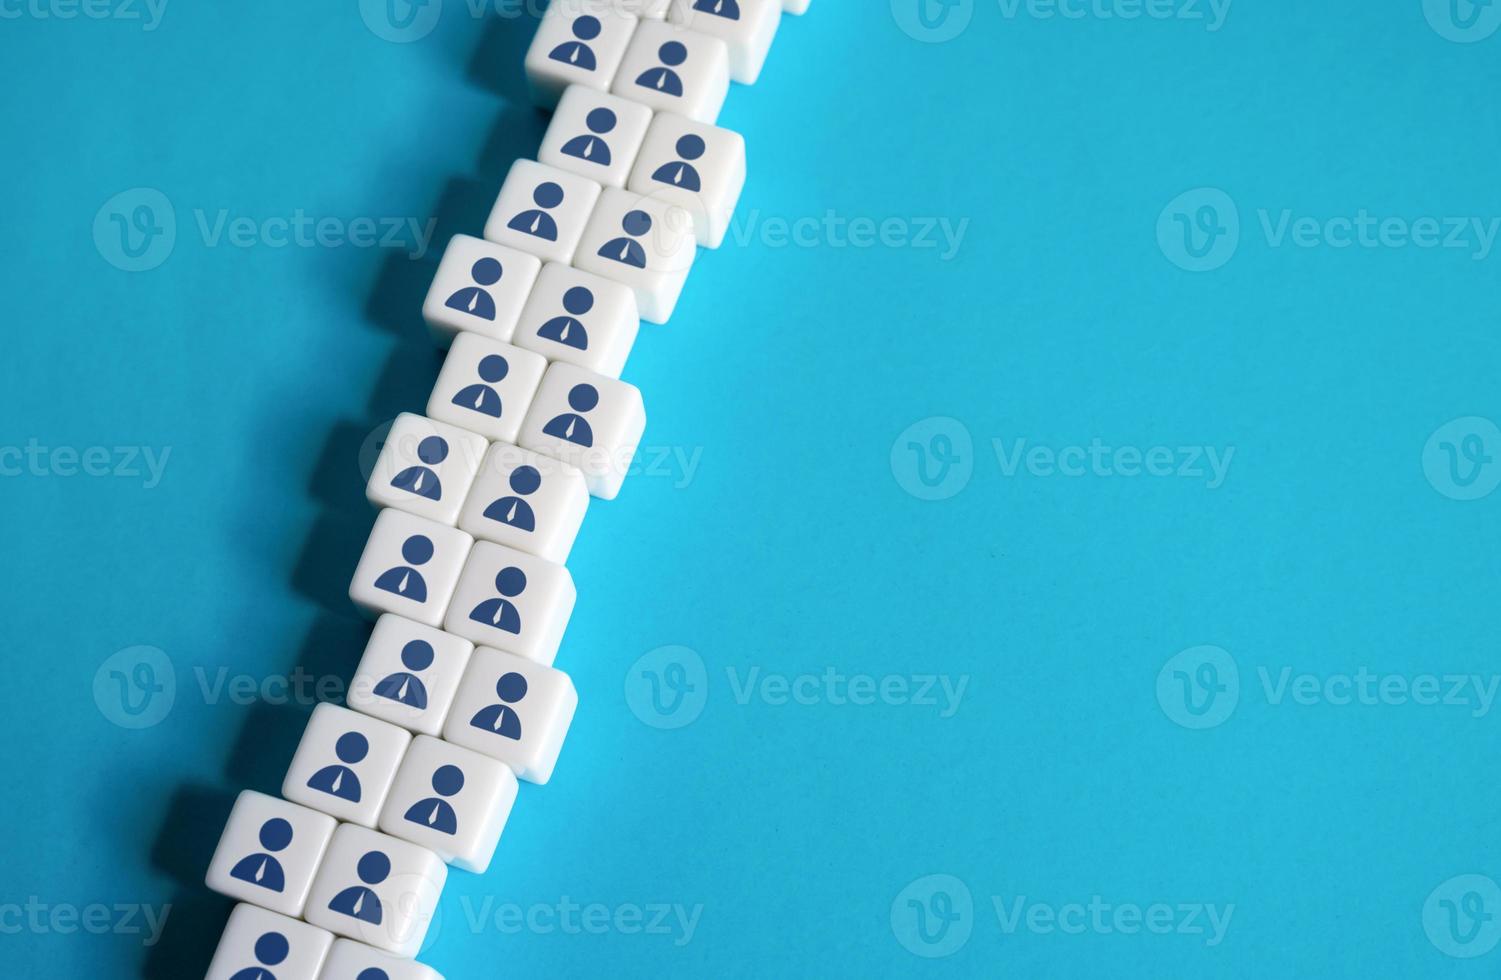 A chain of blocks of workers on a blue background. Place for text. Copyspace. Help wanted. Hiring new employees for vacancies. Human resources and work force. Staffing and recruiting candidates photo